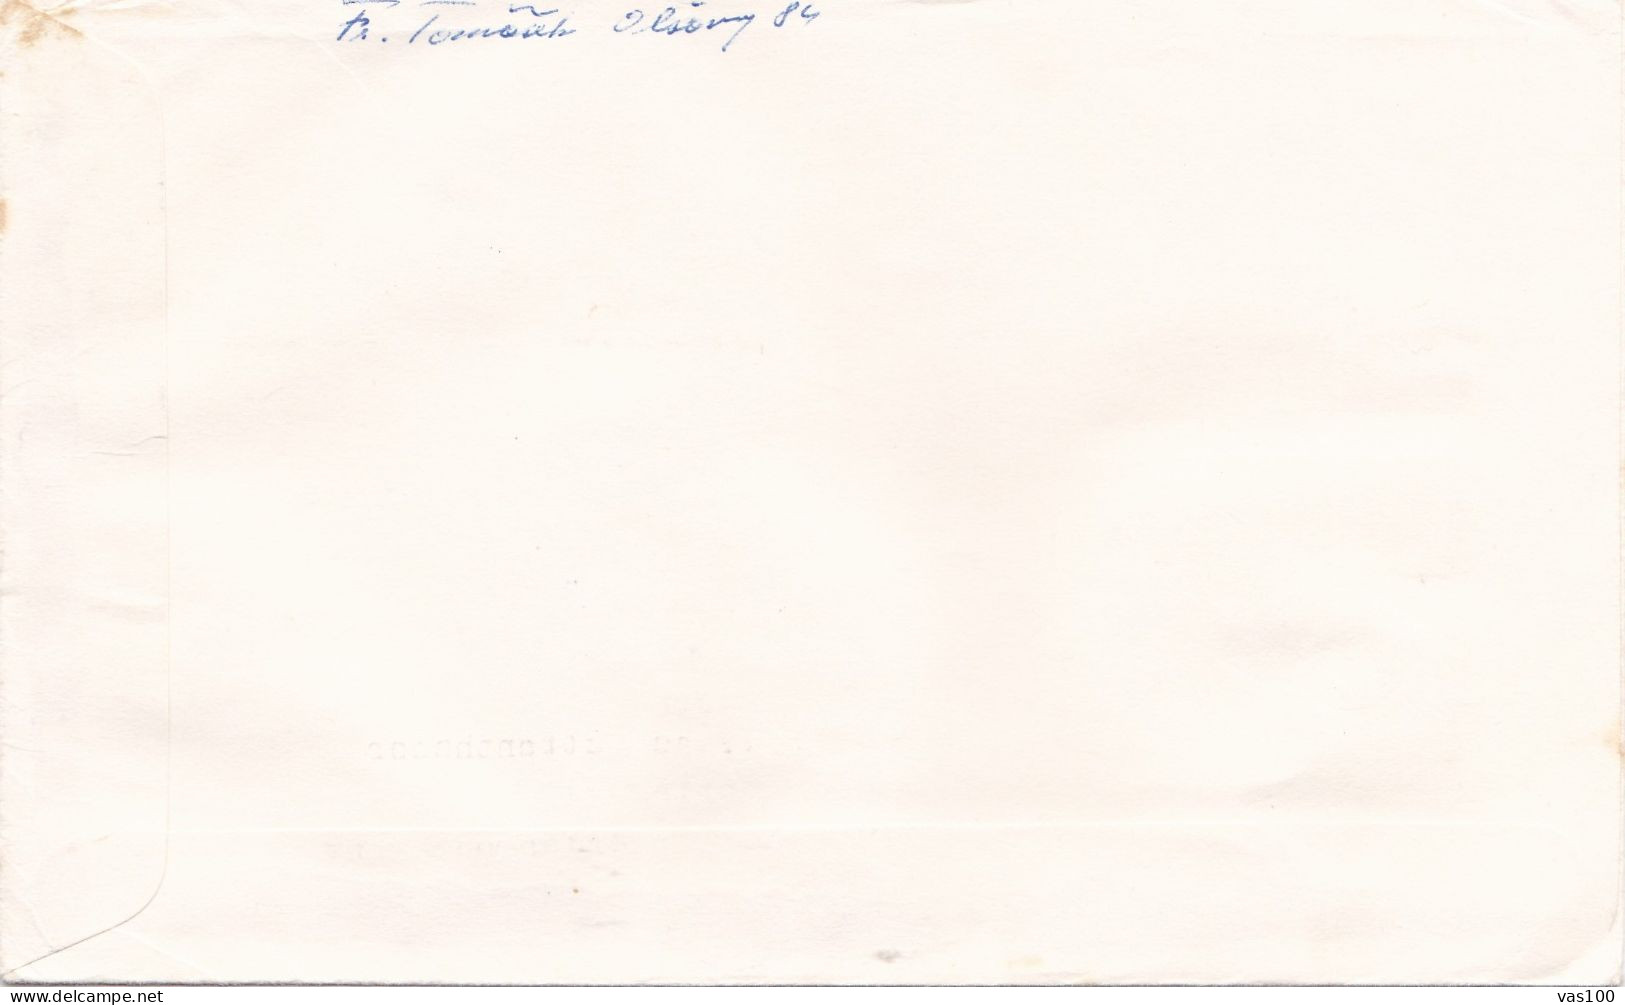 THE PAINTING  COVERS FDC  CIRCULATED 1976 Tchécoslovaquie - Lettres & Documents